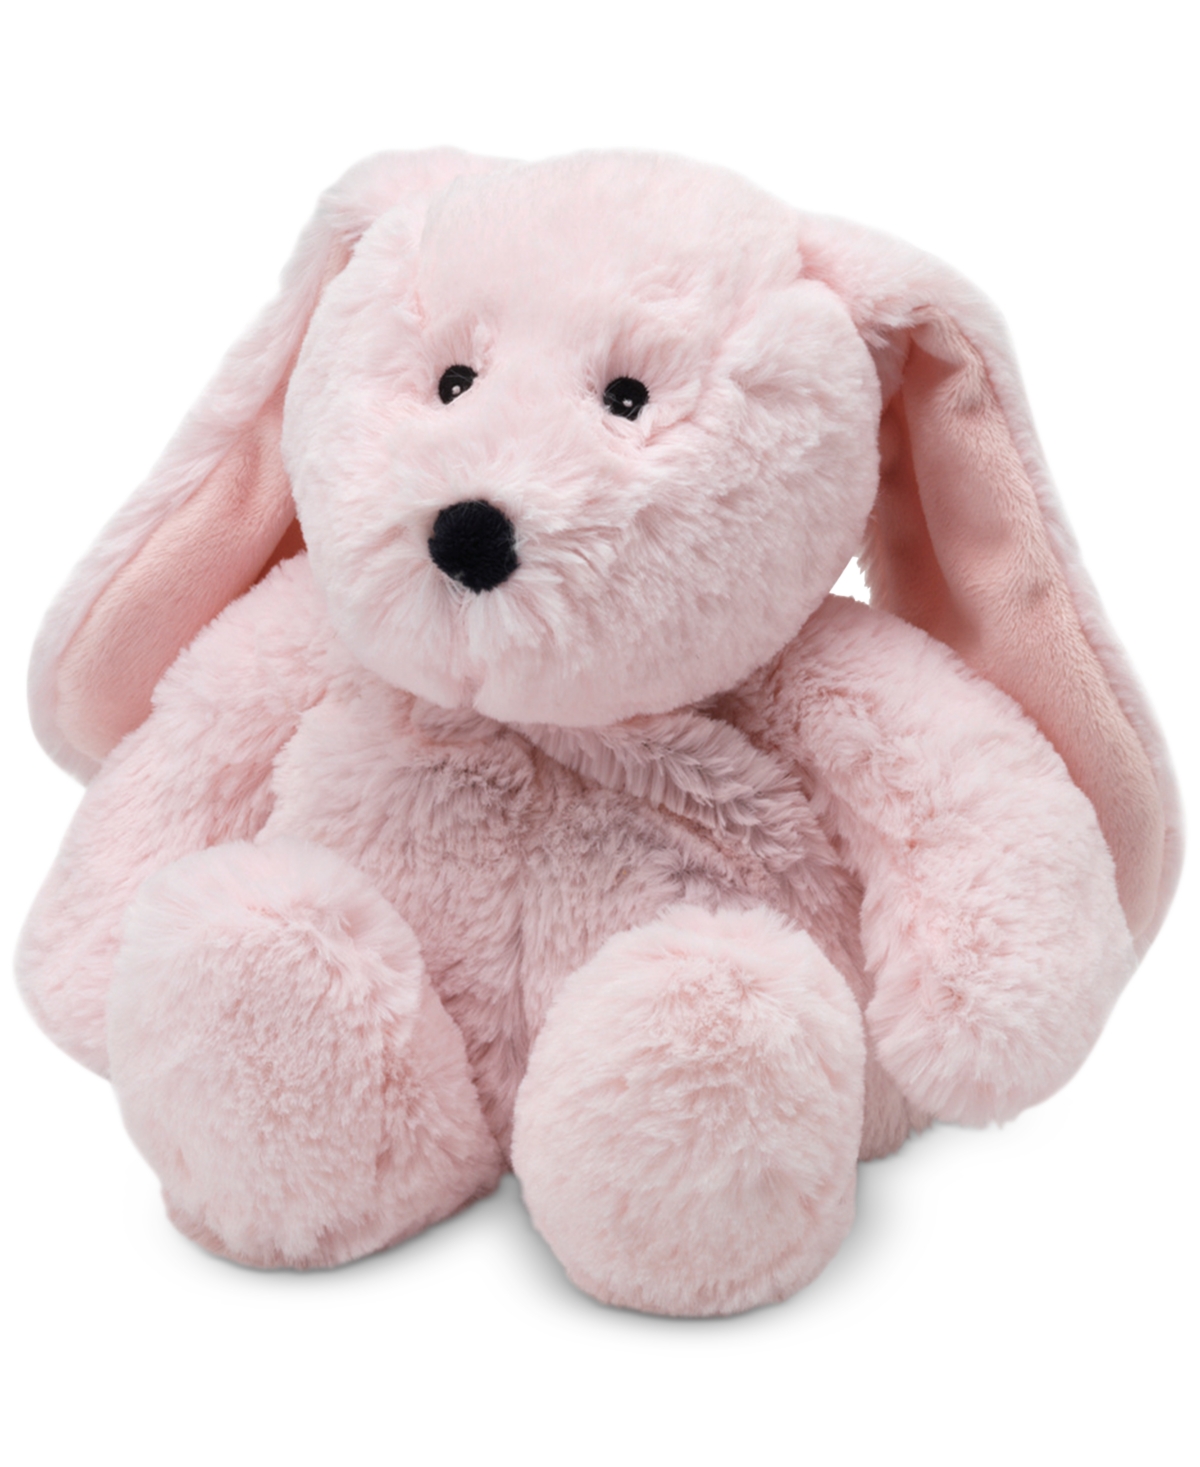 Warmies Bunny Microwavable Plush Toy In Pink